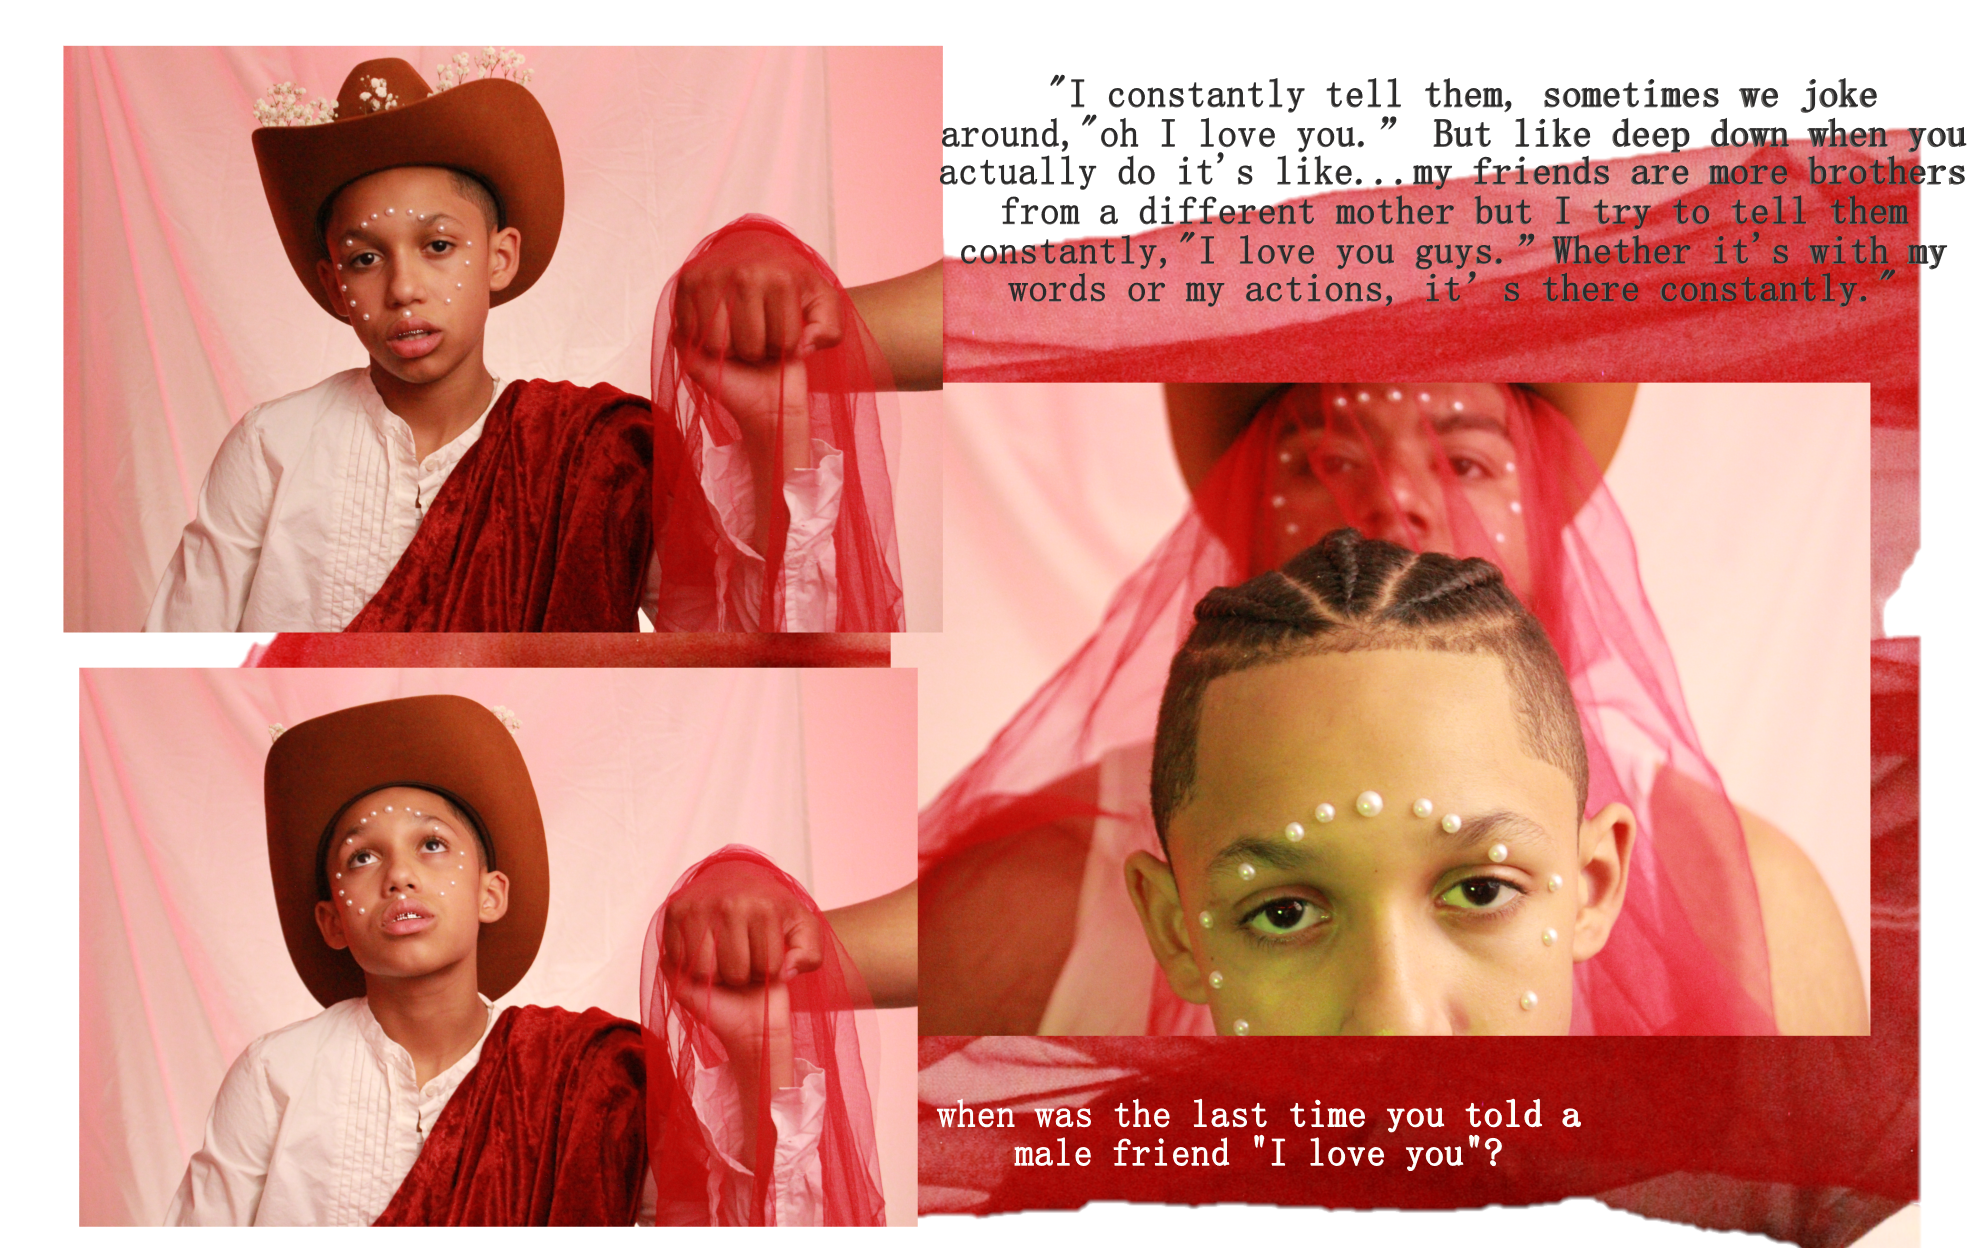 A photo collage of Jaden and Ulises, each photo looks as if it was taken underneath a red hue. Two of the portraits are just of Jaden, a young boy, wearing a cowboy hat, a red cloak of sorts, and pearls on his face. There is text on the photo collage that reads, “I constantly tell them, sometimes we joke around, “oh I love you.” But like deep down when you actually do it’s like…my friends are more brothers from a different mother but I try to tell them constantly, “I love you guys.” Whether it’s with me words or my actions, it’s there constantly.” When was the last time you told a male friend “I love you”? 